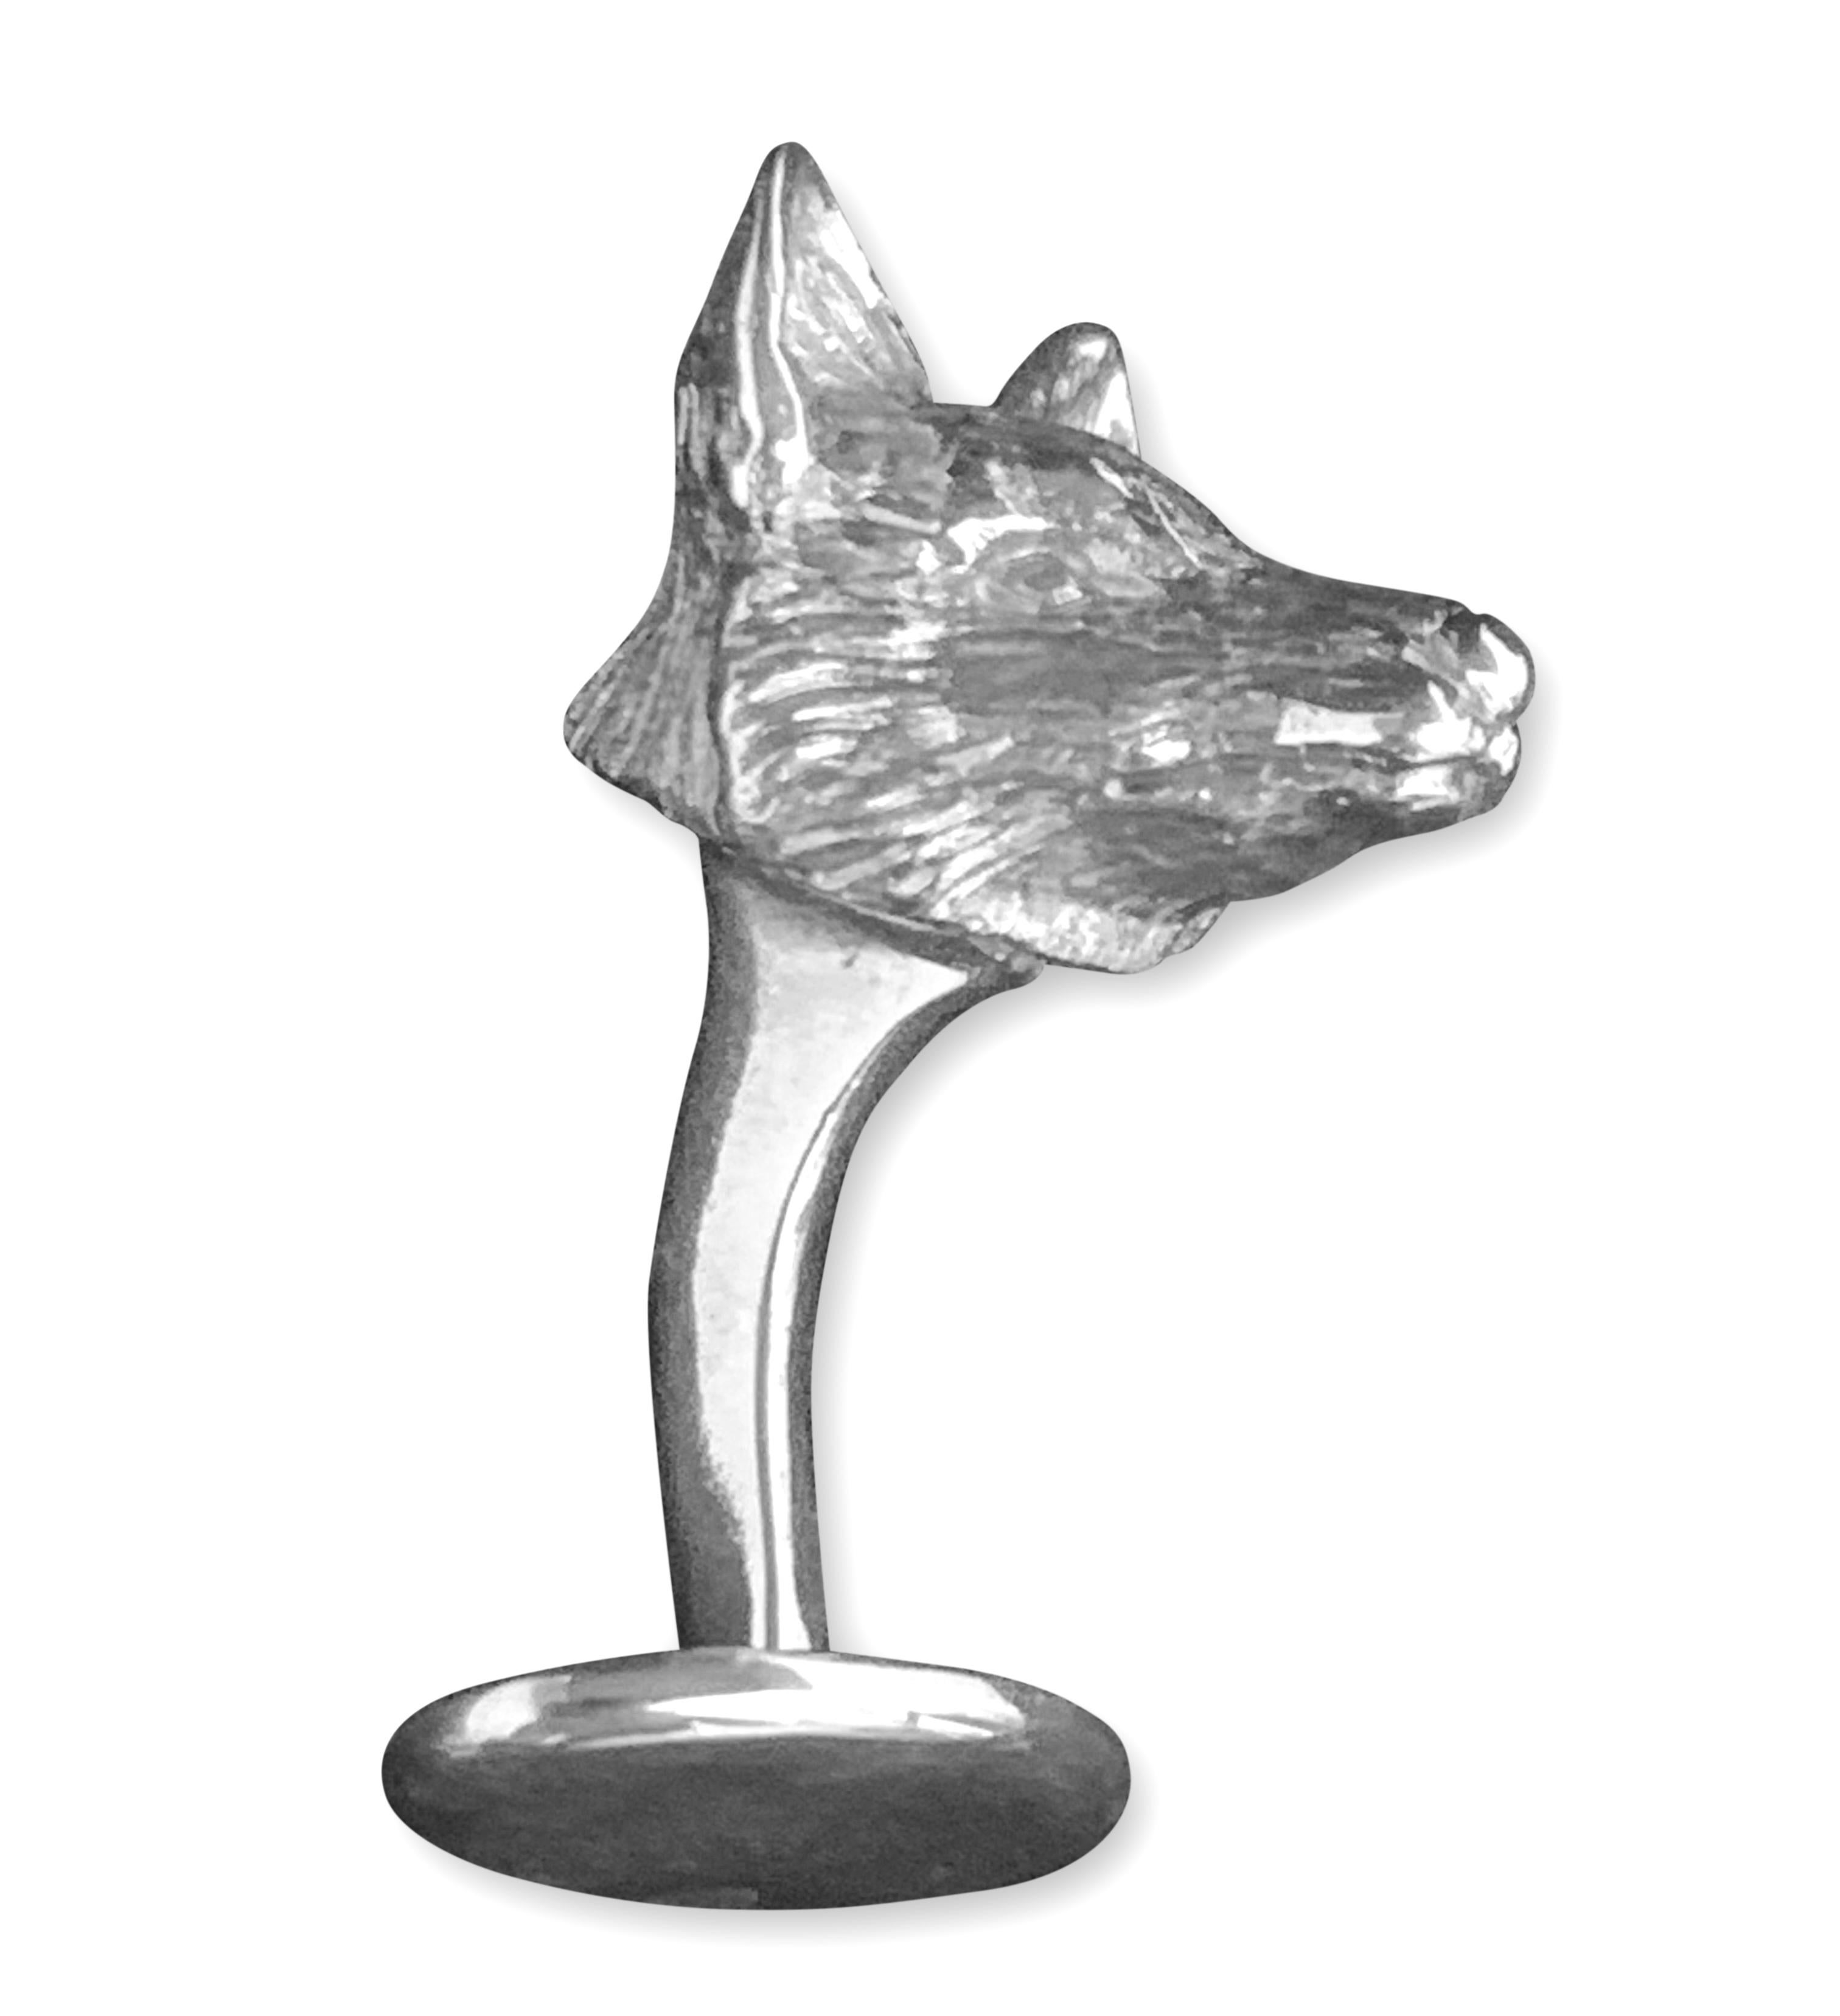 Bespoke Miniature Sculptures of Foxes in sterling silver with solid back cufflinks by the master jewelry maker, Paul Eaton, VPRMS MAA (England) are collectable, stunning miniature sculptures for the fox, art and jewelry lover.  Paul Eaton carves his